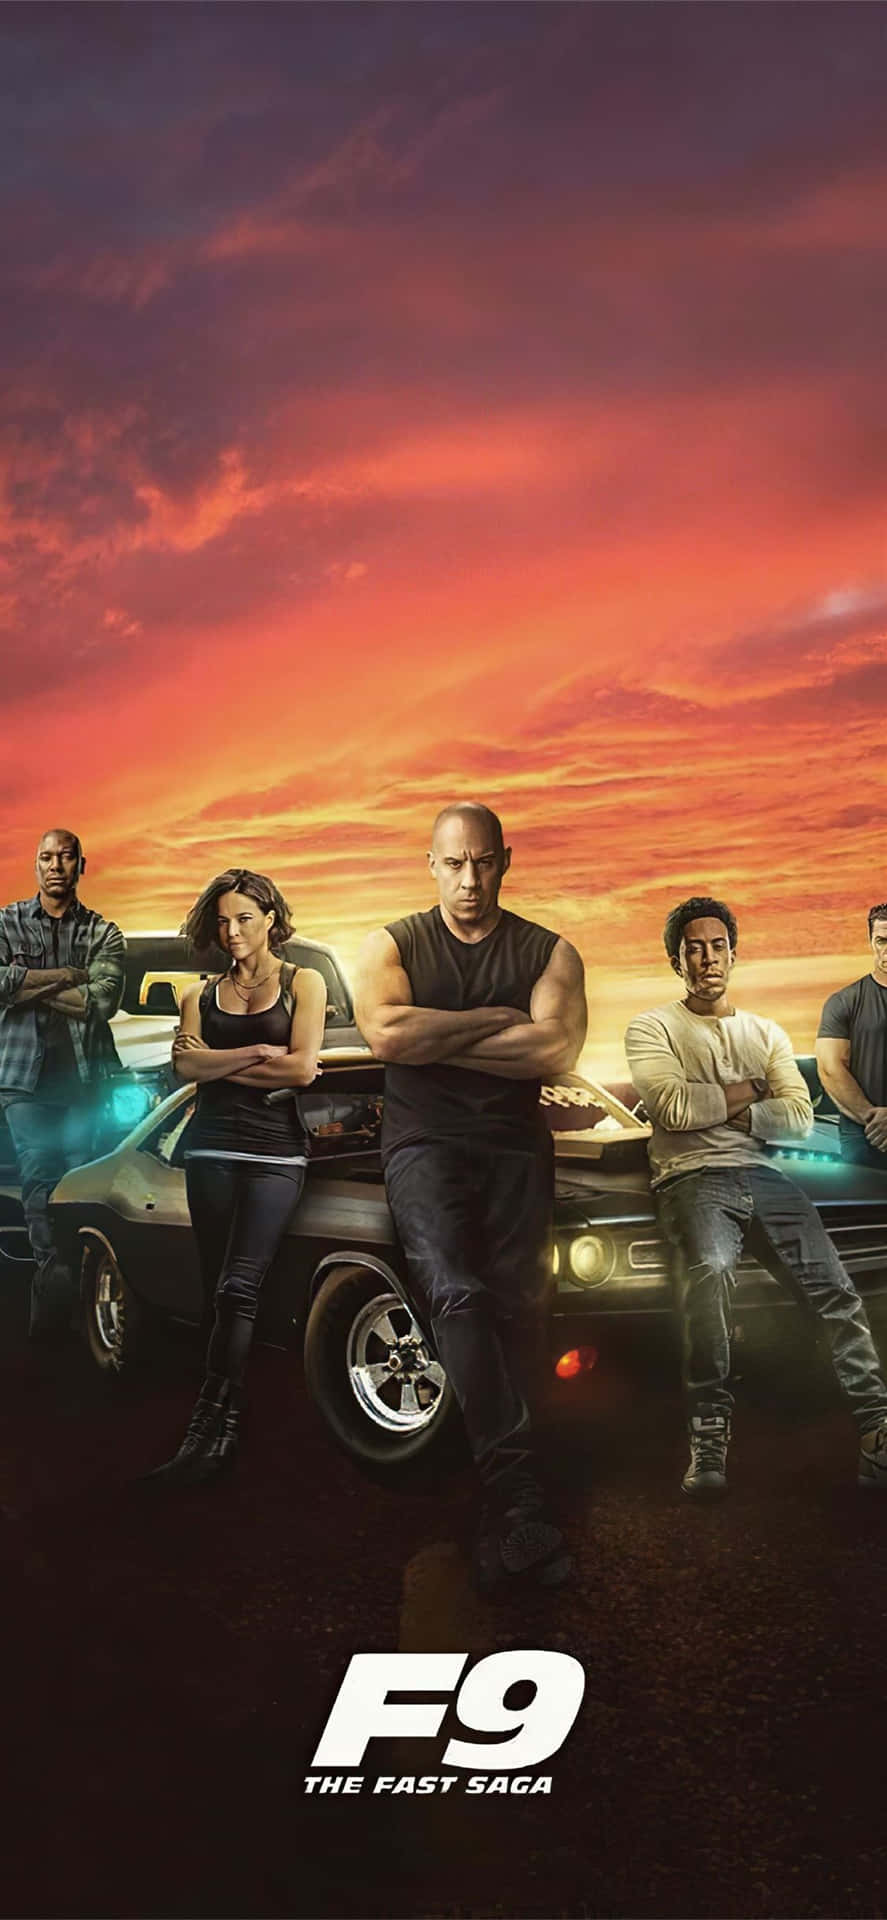 Vin Diesel stars as Dominic Toretto in Fast and Furious 9. Wallpaper